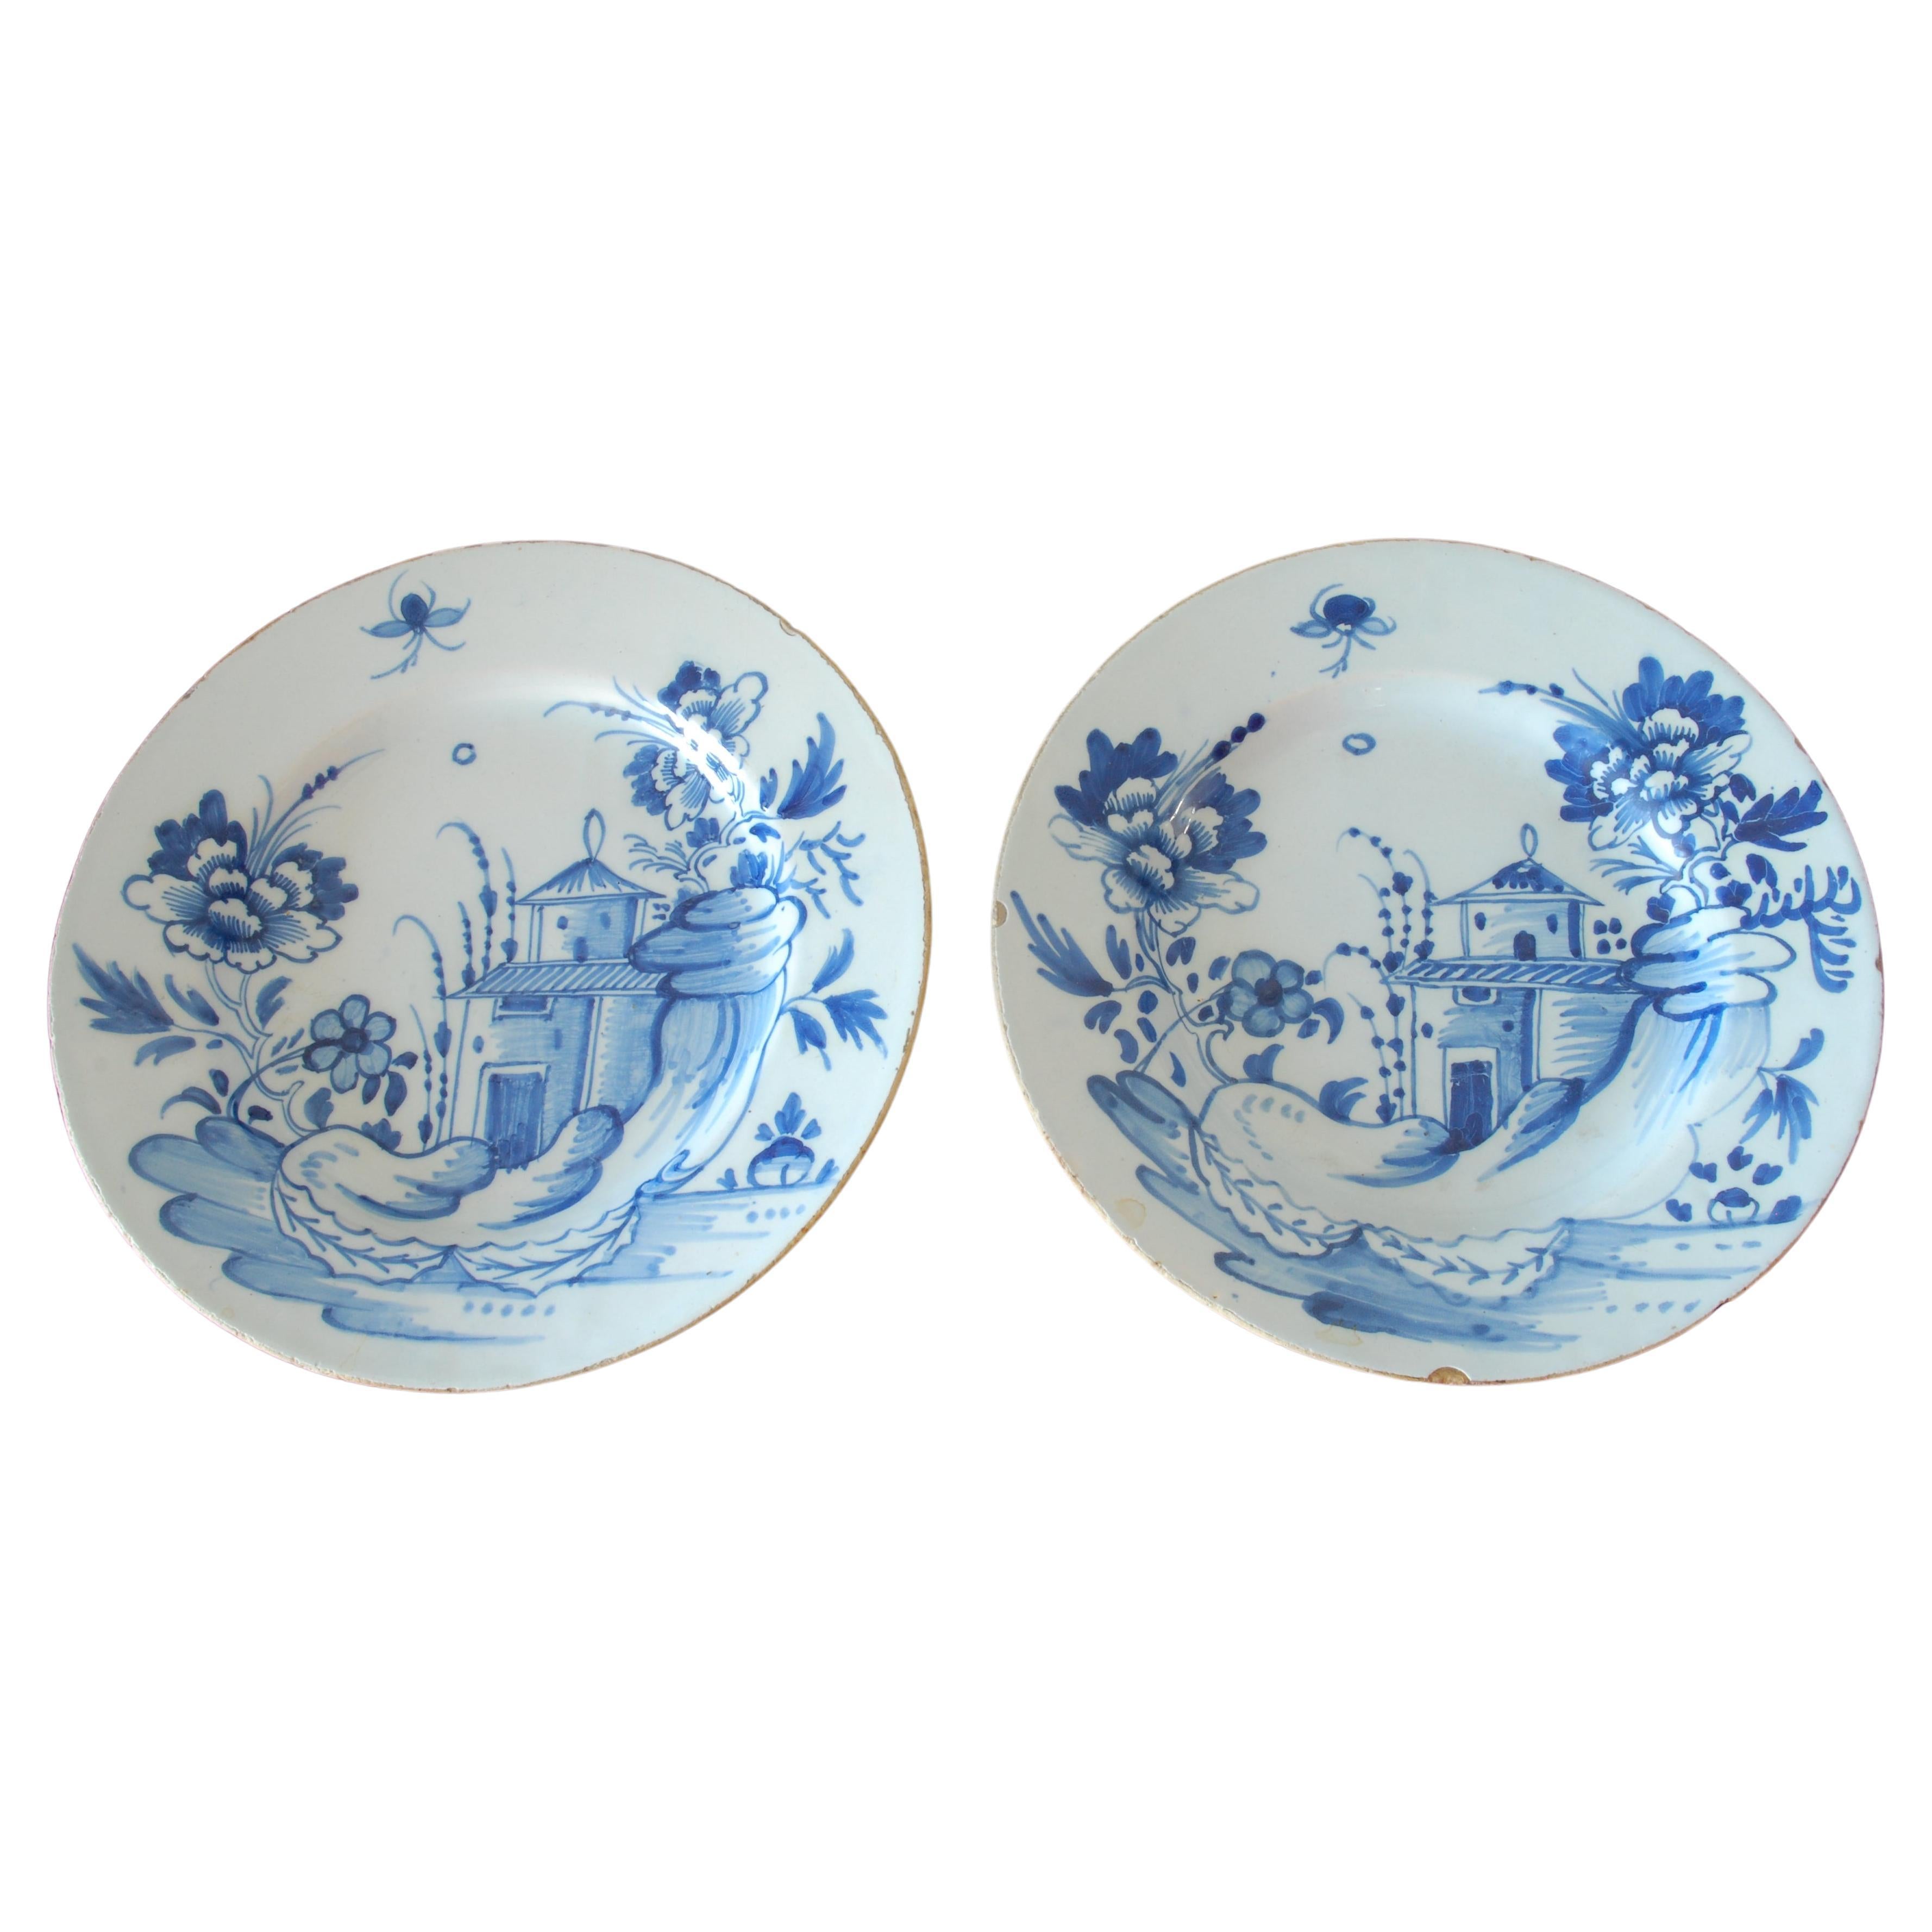 Pair of Chinoiserie Delft plates. England C1760